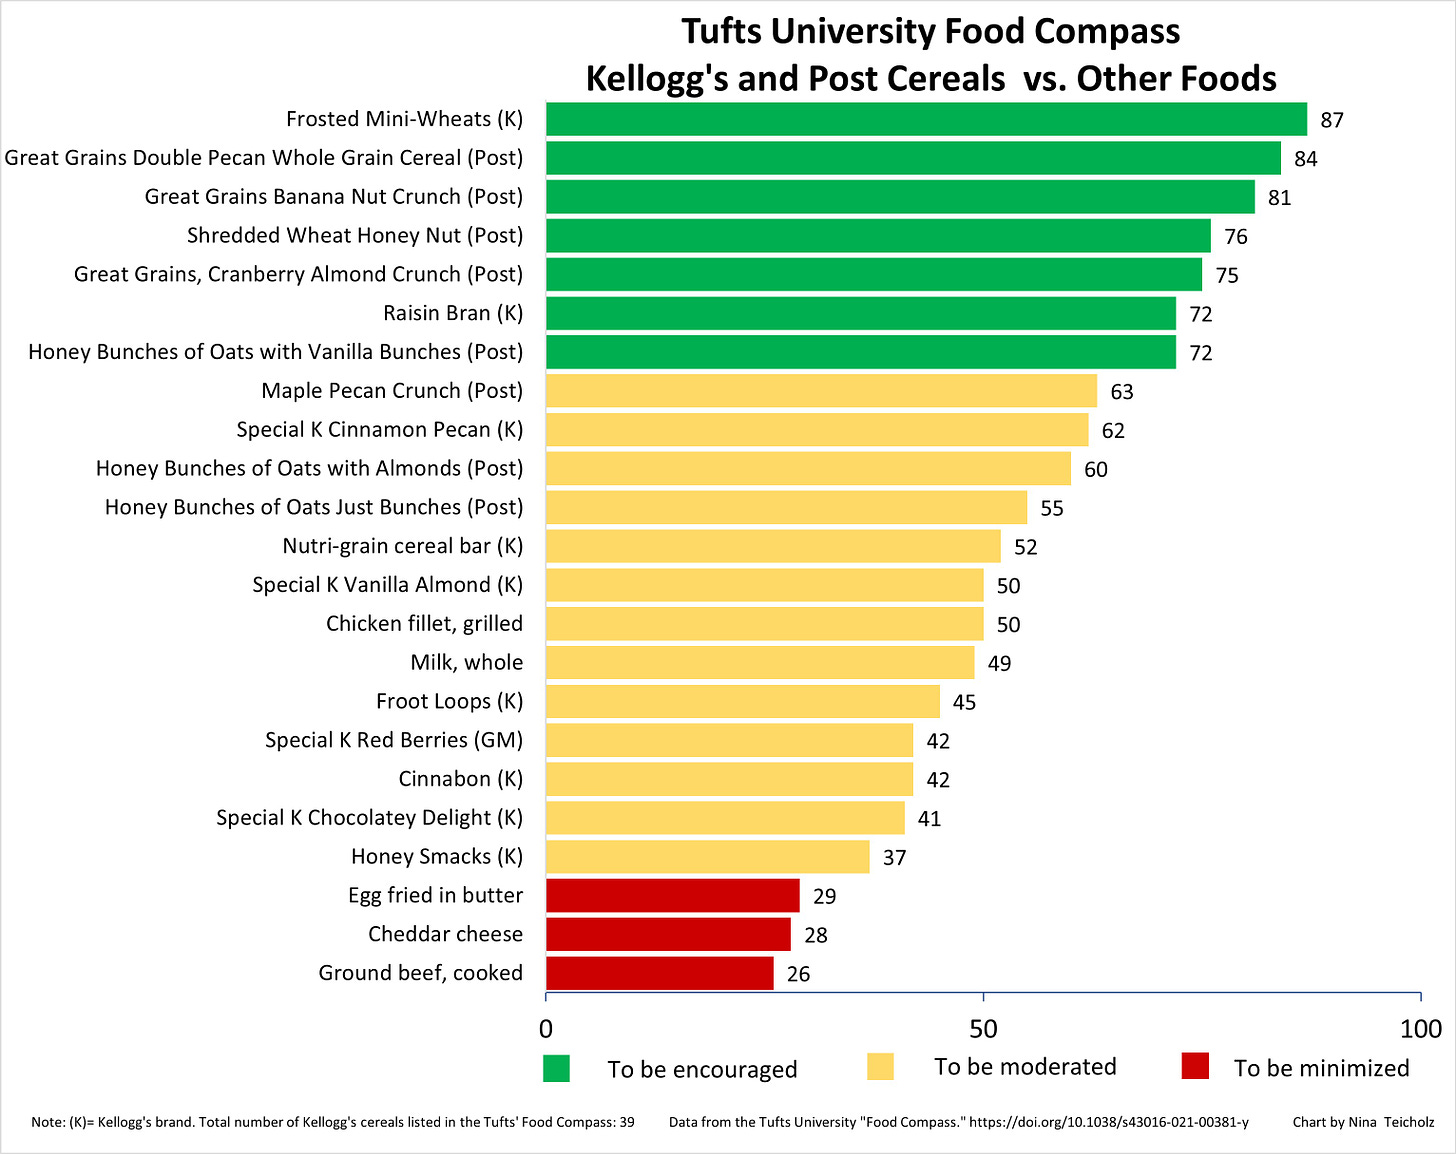 Tufts' Food Compass...It's Worse Than You Thought